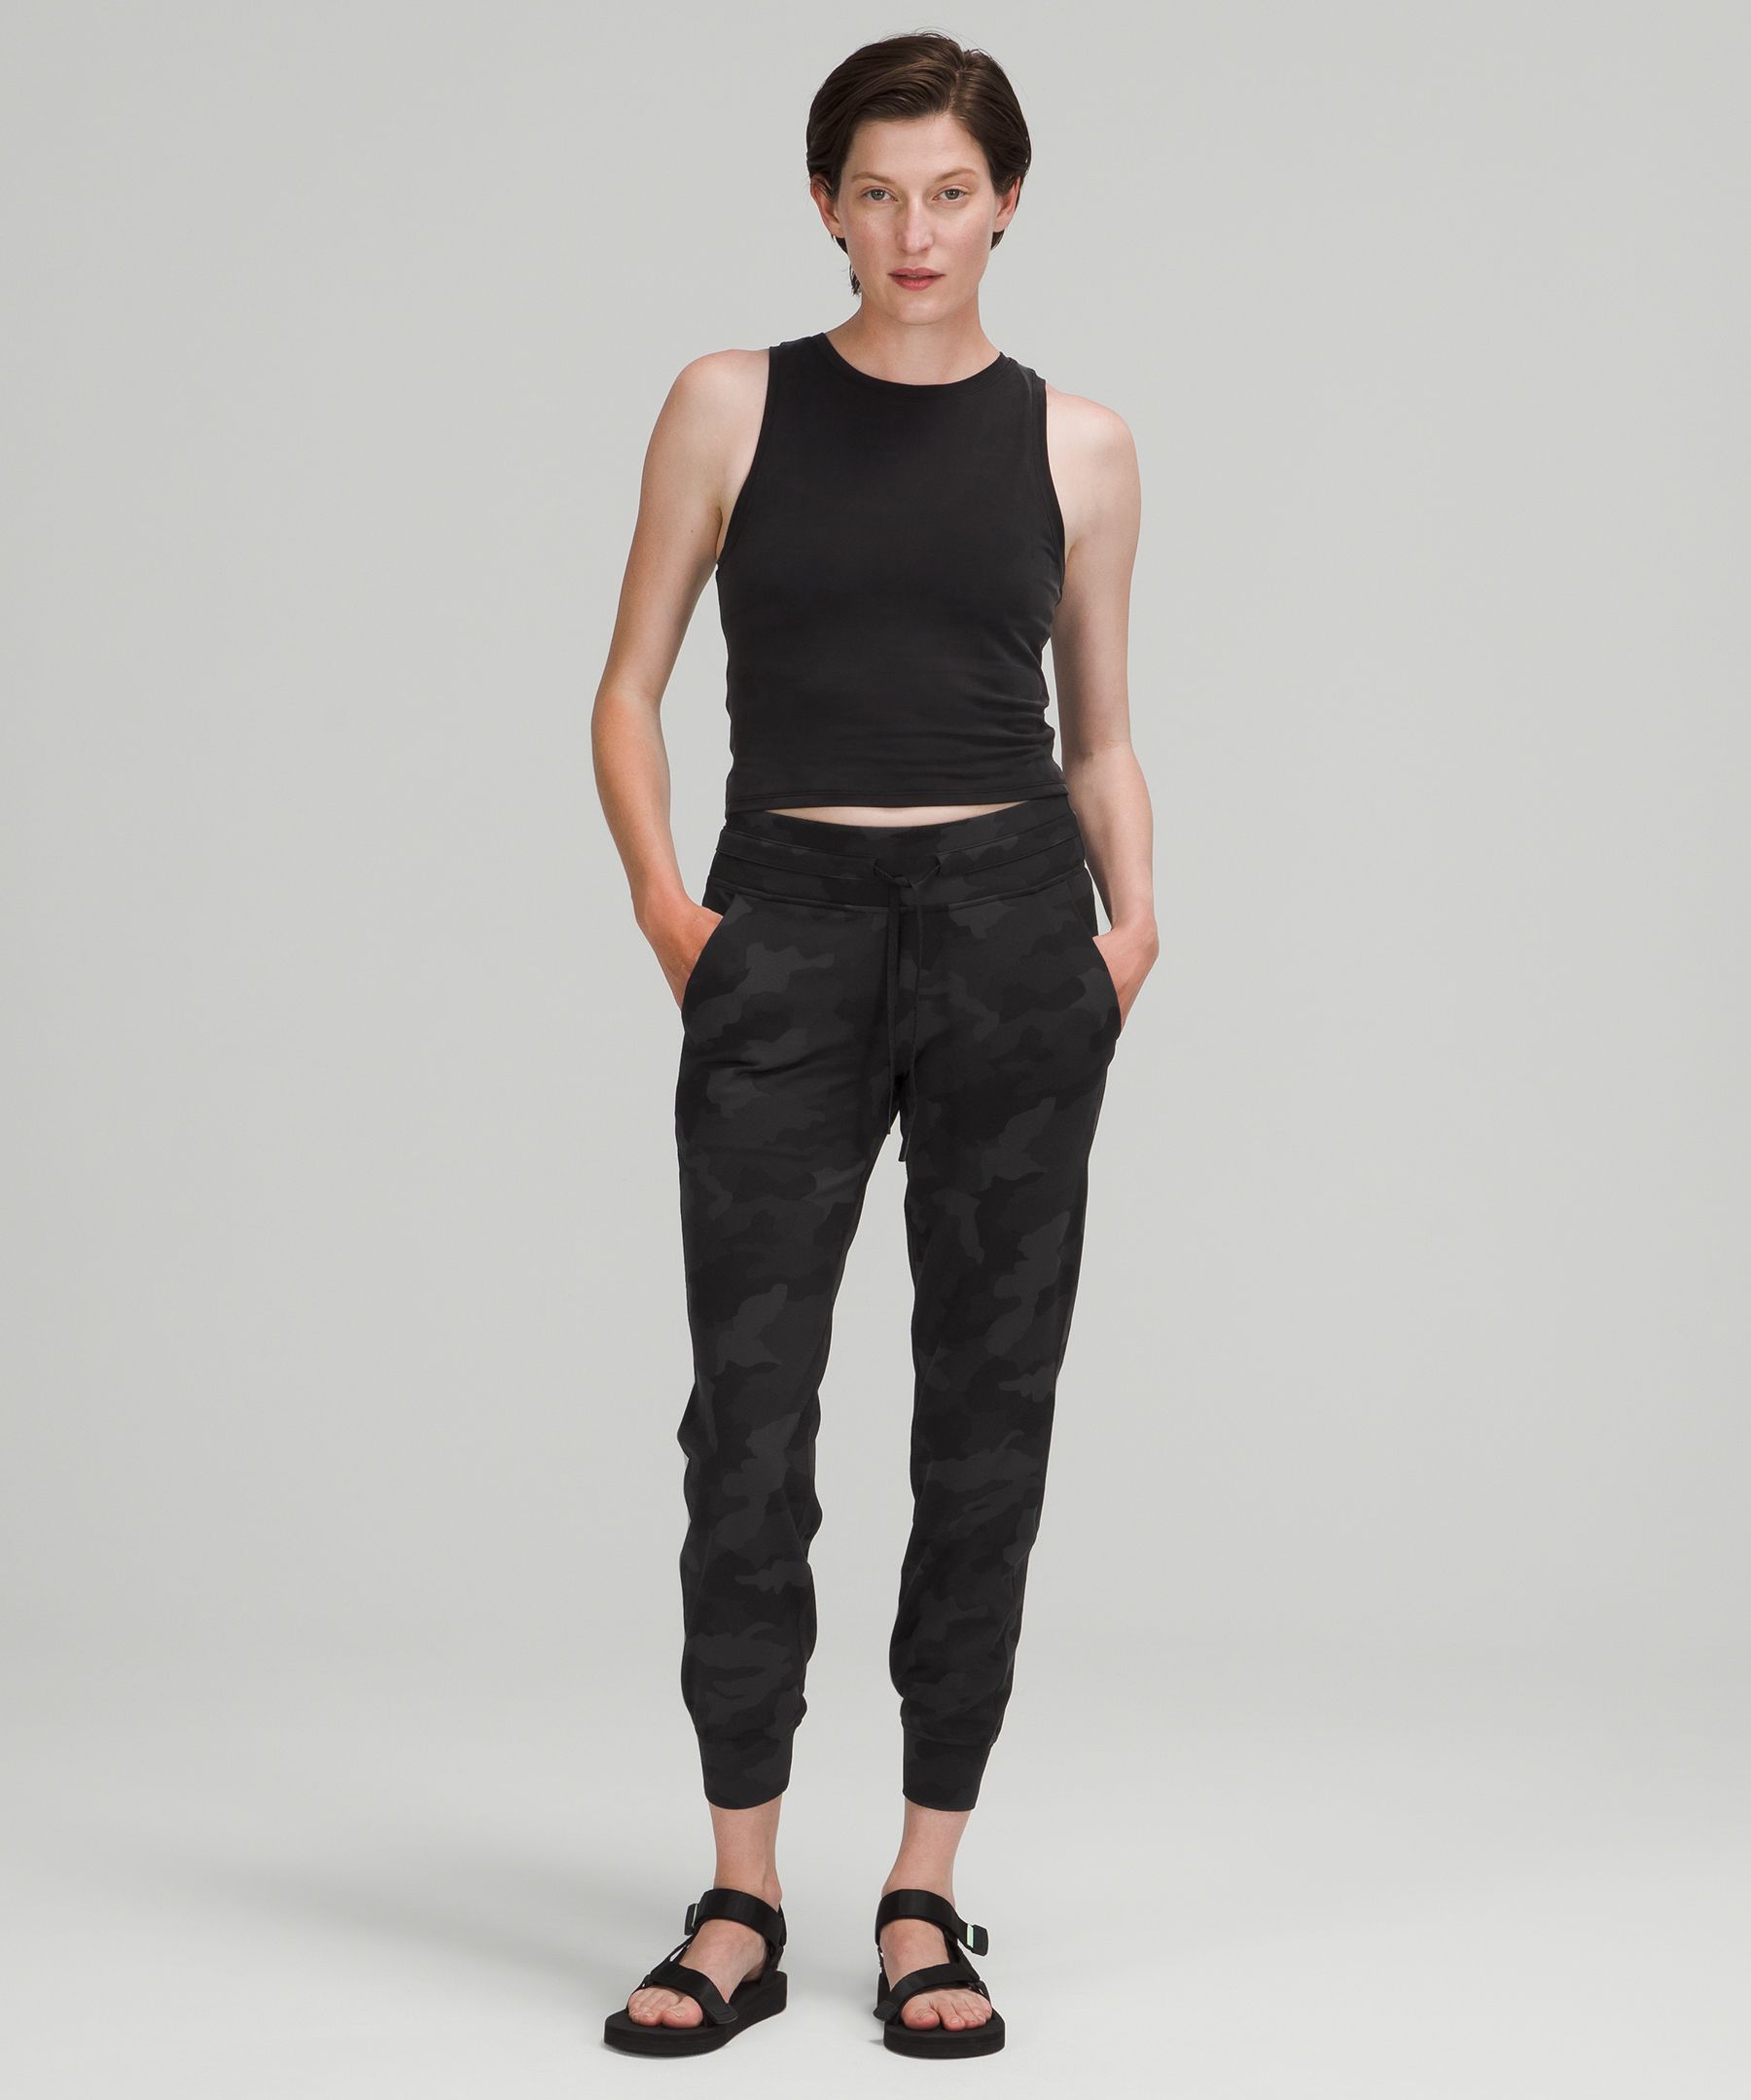 Lululemon Ready To Rulu Jogger 7/8 *online Only In Neutrals